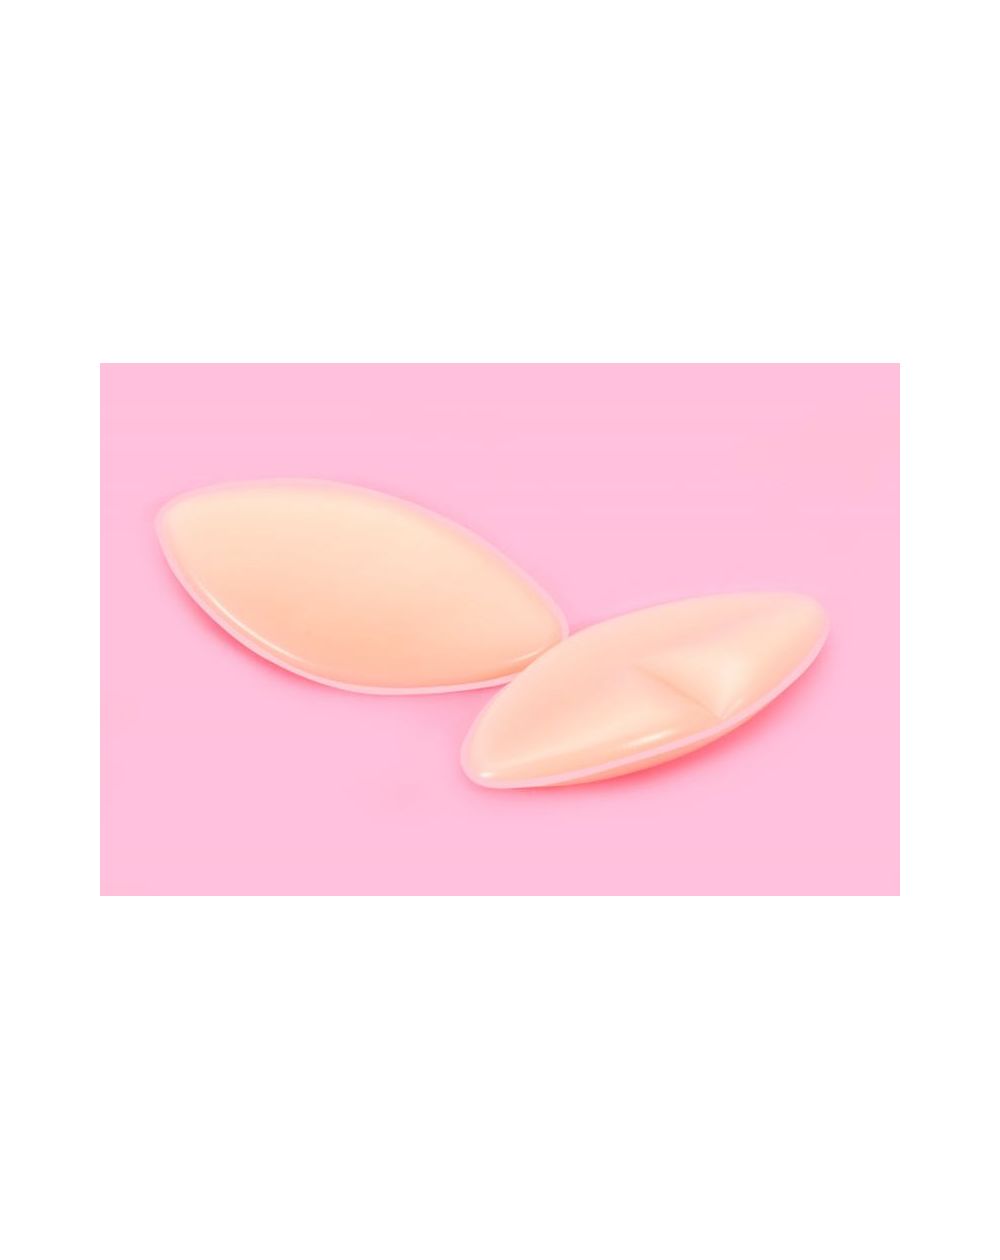 Julimex silicone modeling insoles WS 03